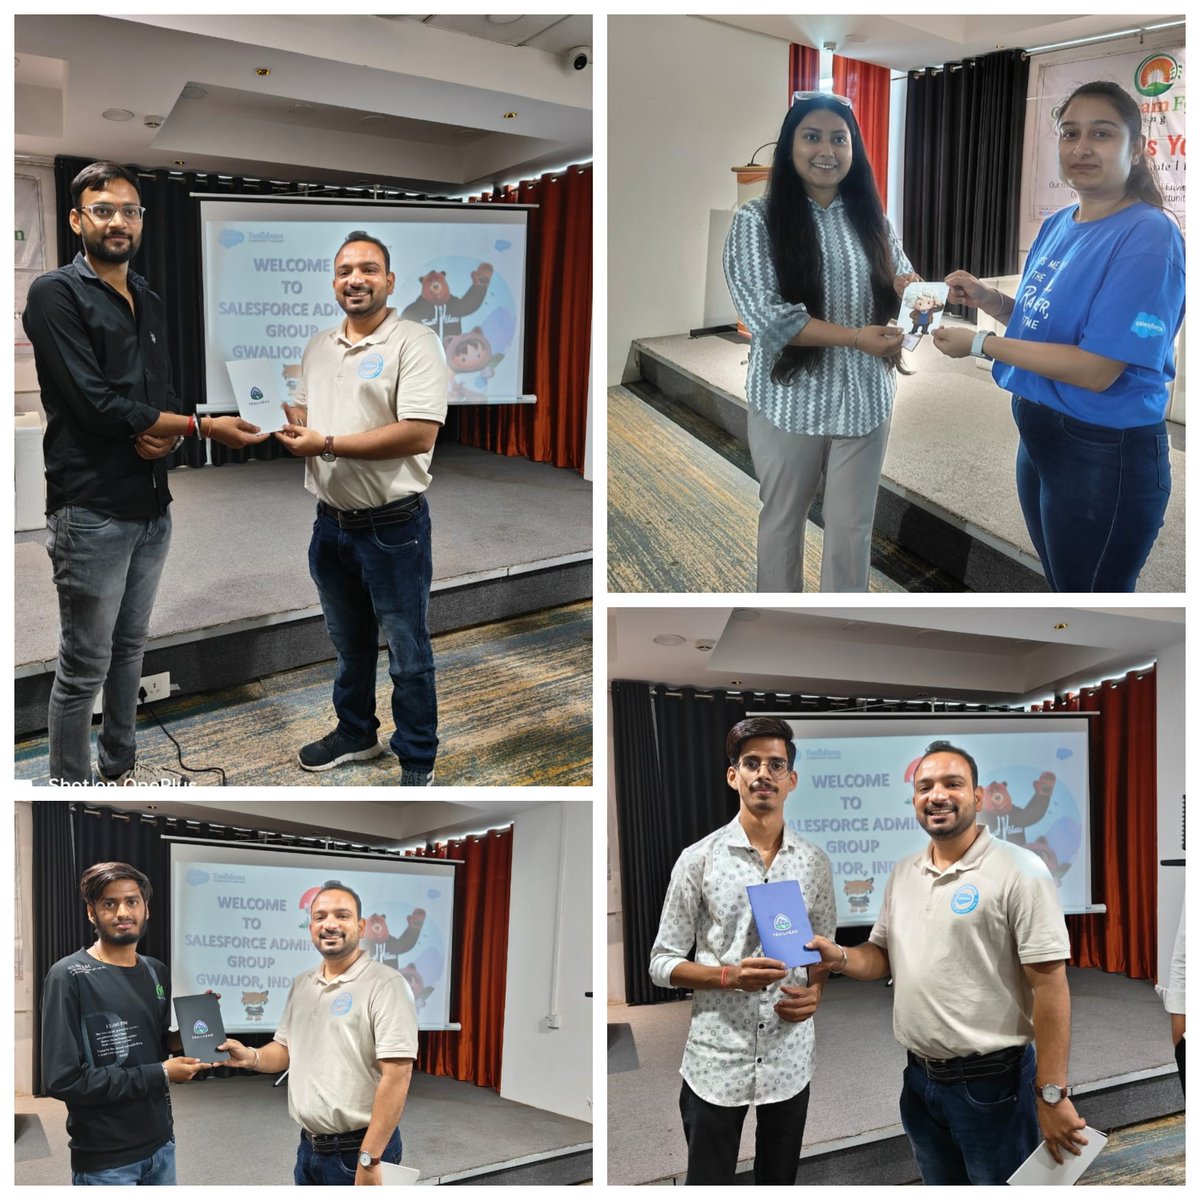 Check out our awesome #Trailblazers who snagged some sweet #SalesforceSwag! 🎉 Apologies for missing some pics, but here are a few lucky winners! 🏆 Keep rocking those prizes and spreading the @salesforce love! 💙 with #SalesforceGwalior #TrailblazerCommunity #BeAtrailblazer